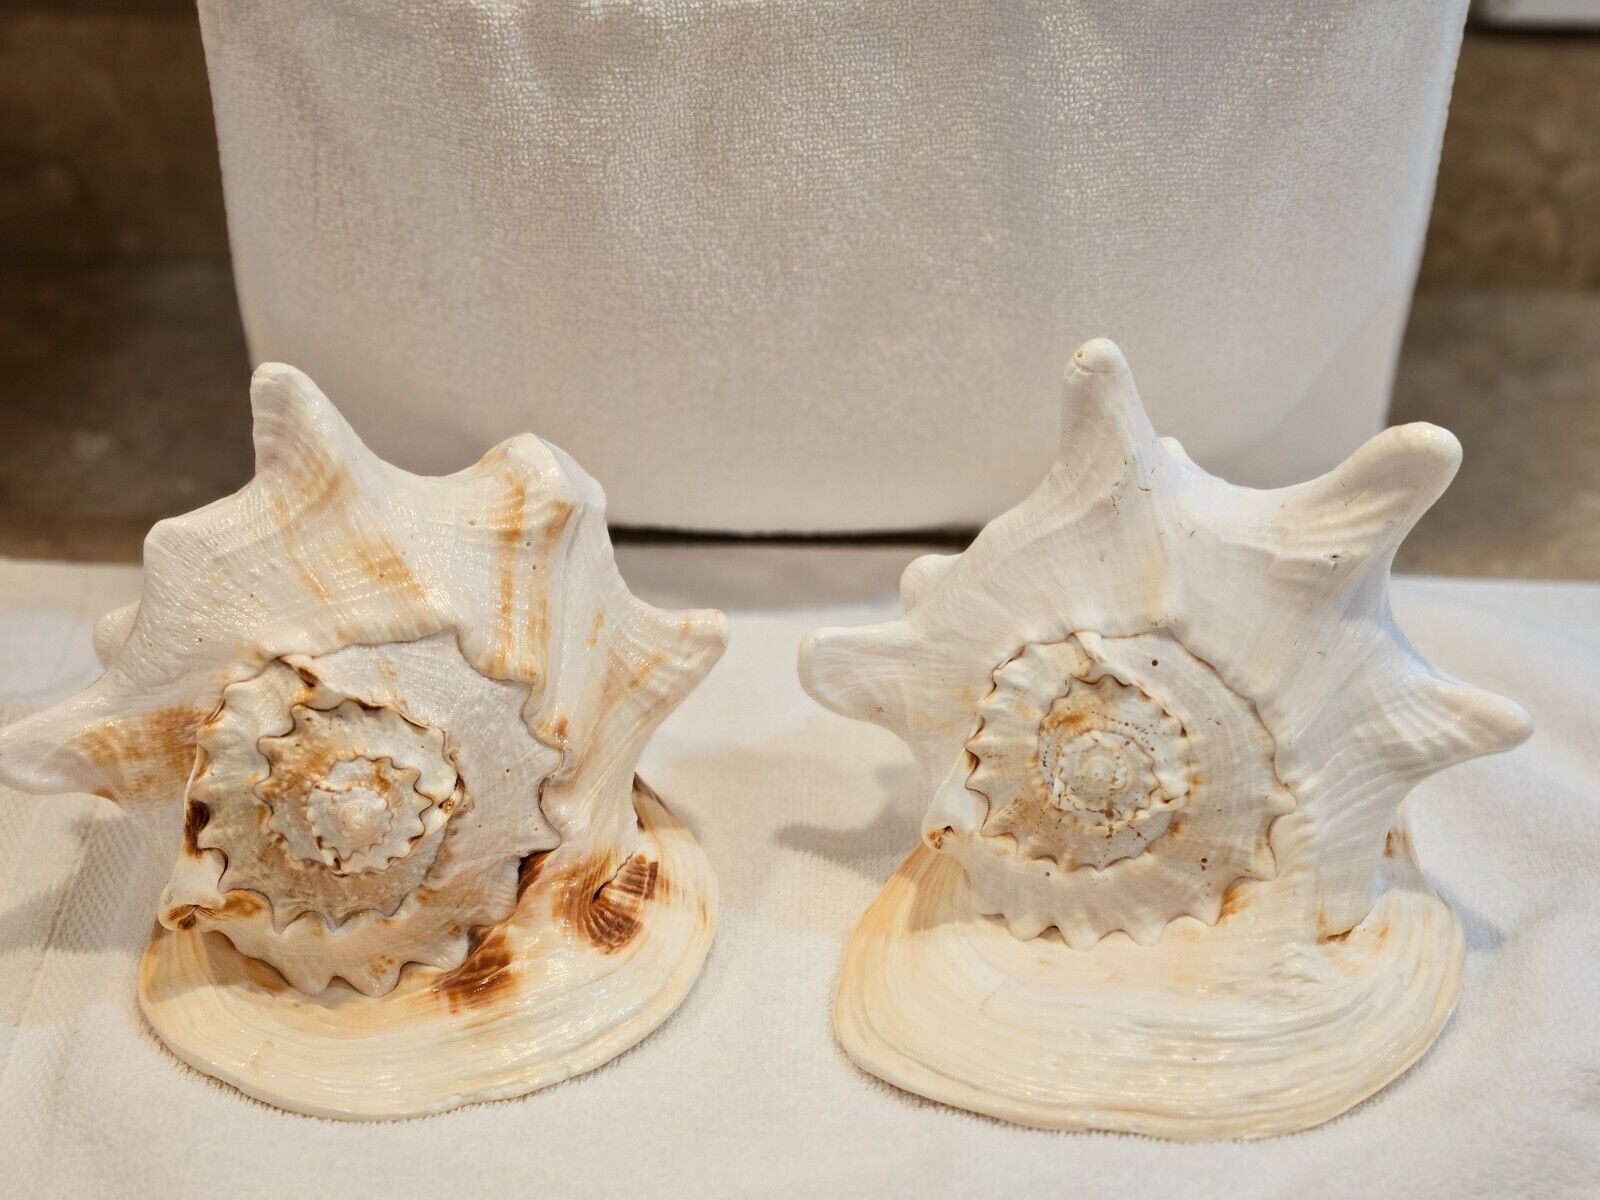 2 LG QUEEN HELMET CONCH SHELLS, NATURAL, VINTAGE, QUALITY PAIR, 10